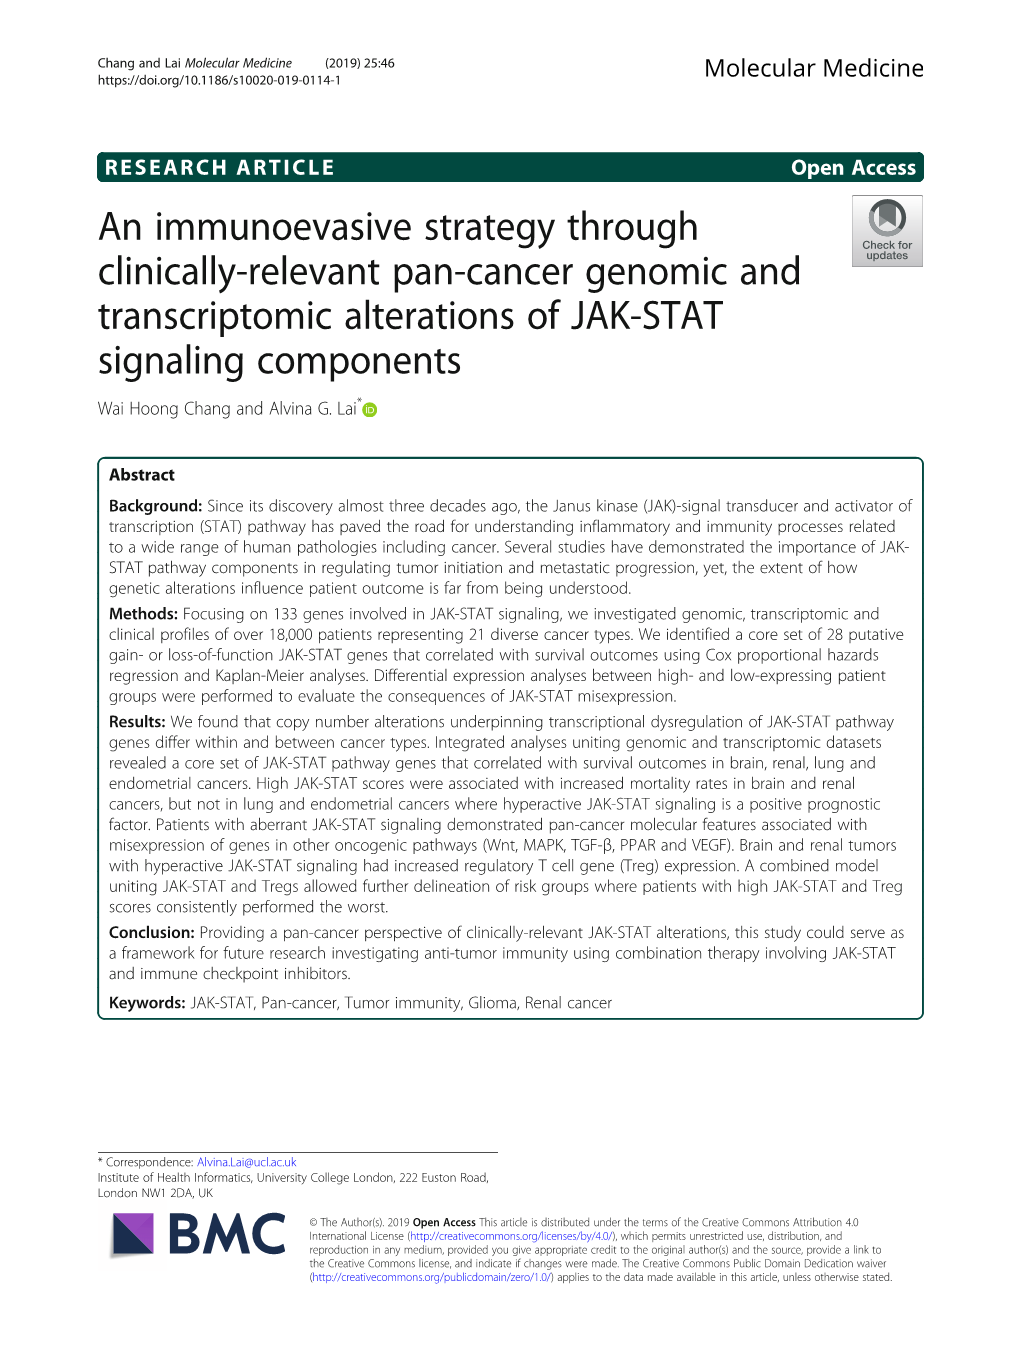 An Immunoevasive Strategy Through Clinically-Relevant Pan-Cancer Genomic and Transcriptomic Alterations of JAK-STAT Signaling Components Wai Hoong Chang and Alvina G